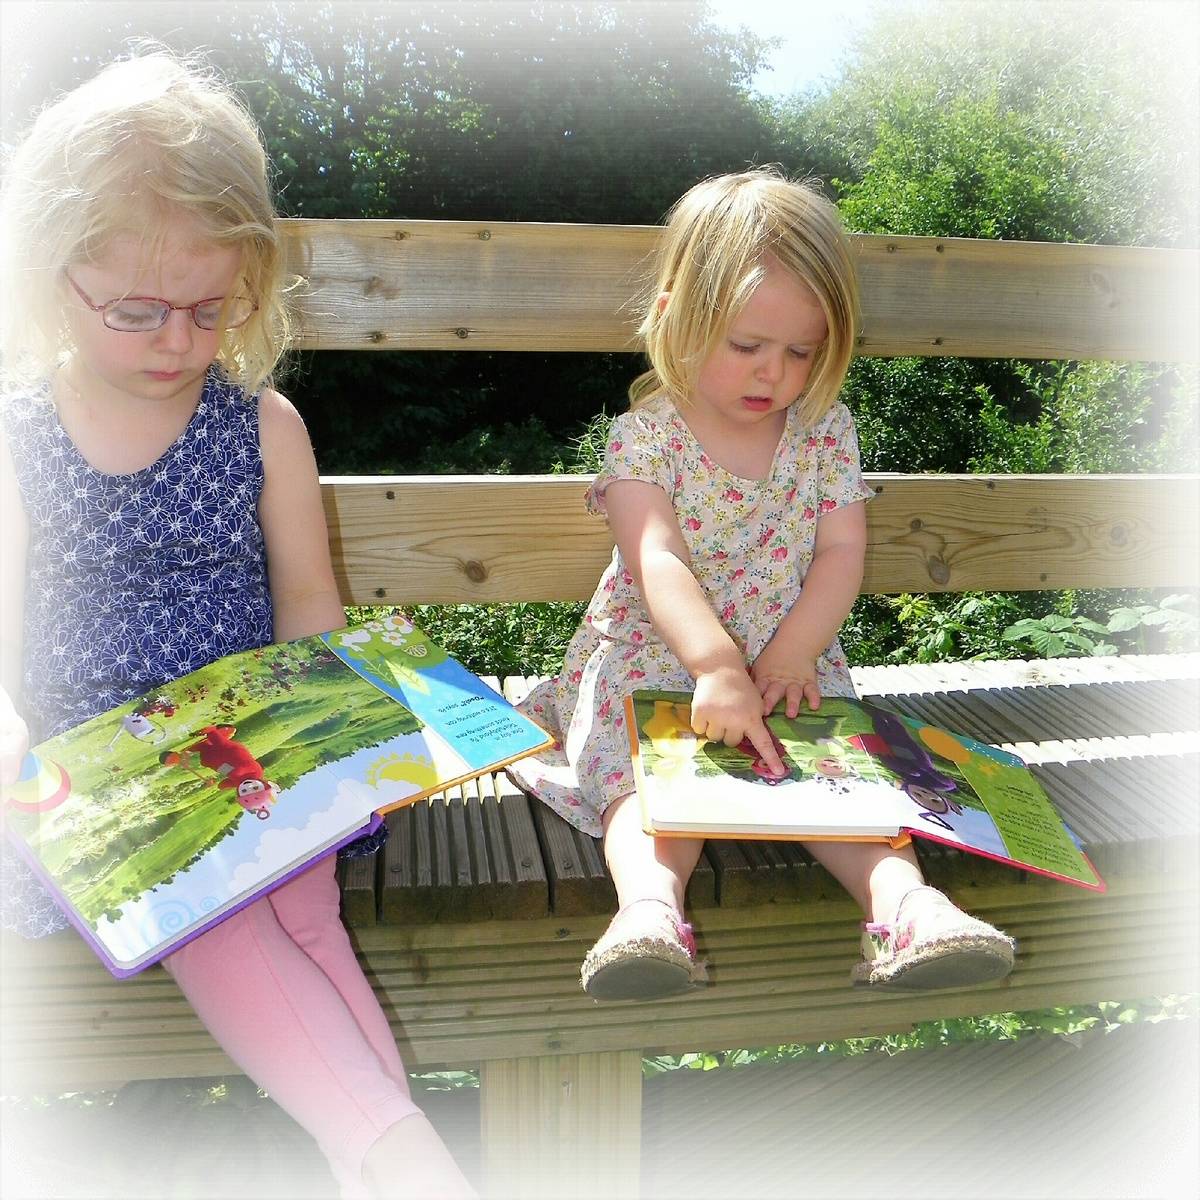 A developing love of books - preparing for school with education books from The Works